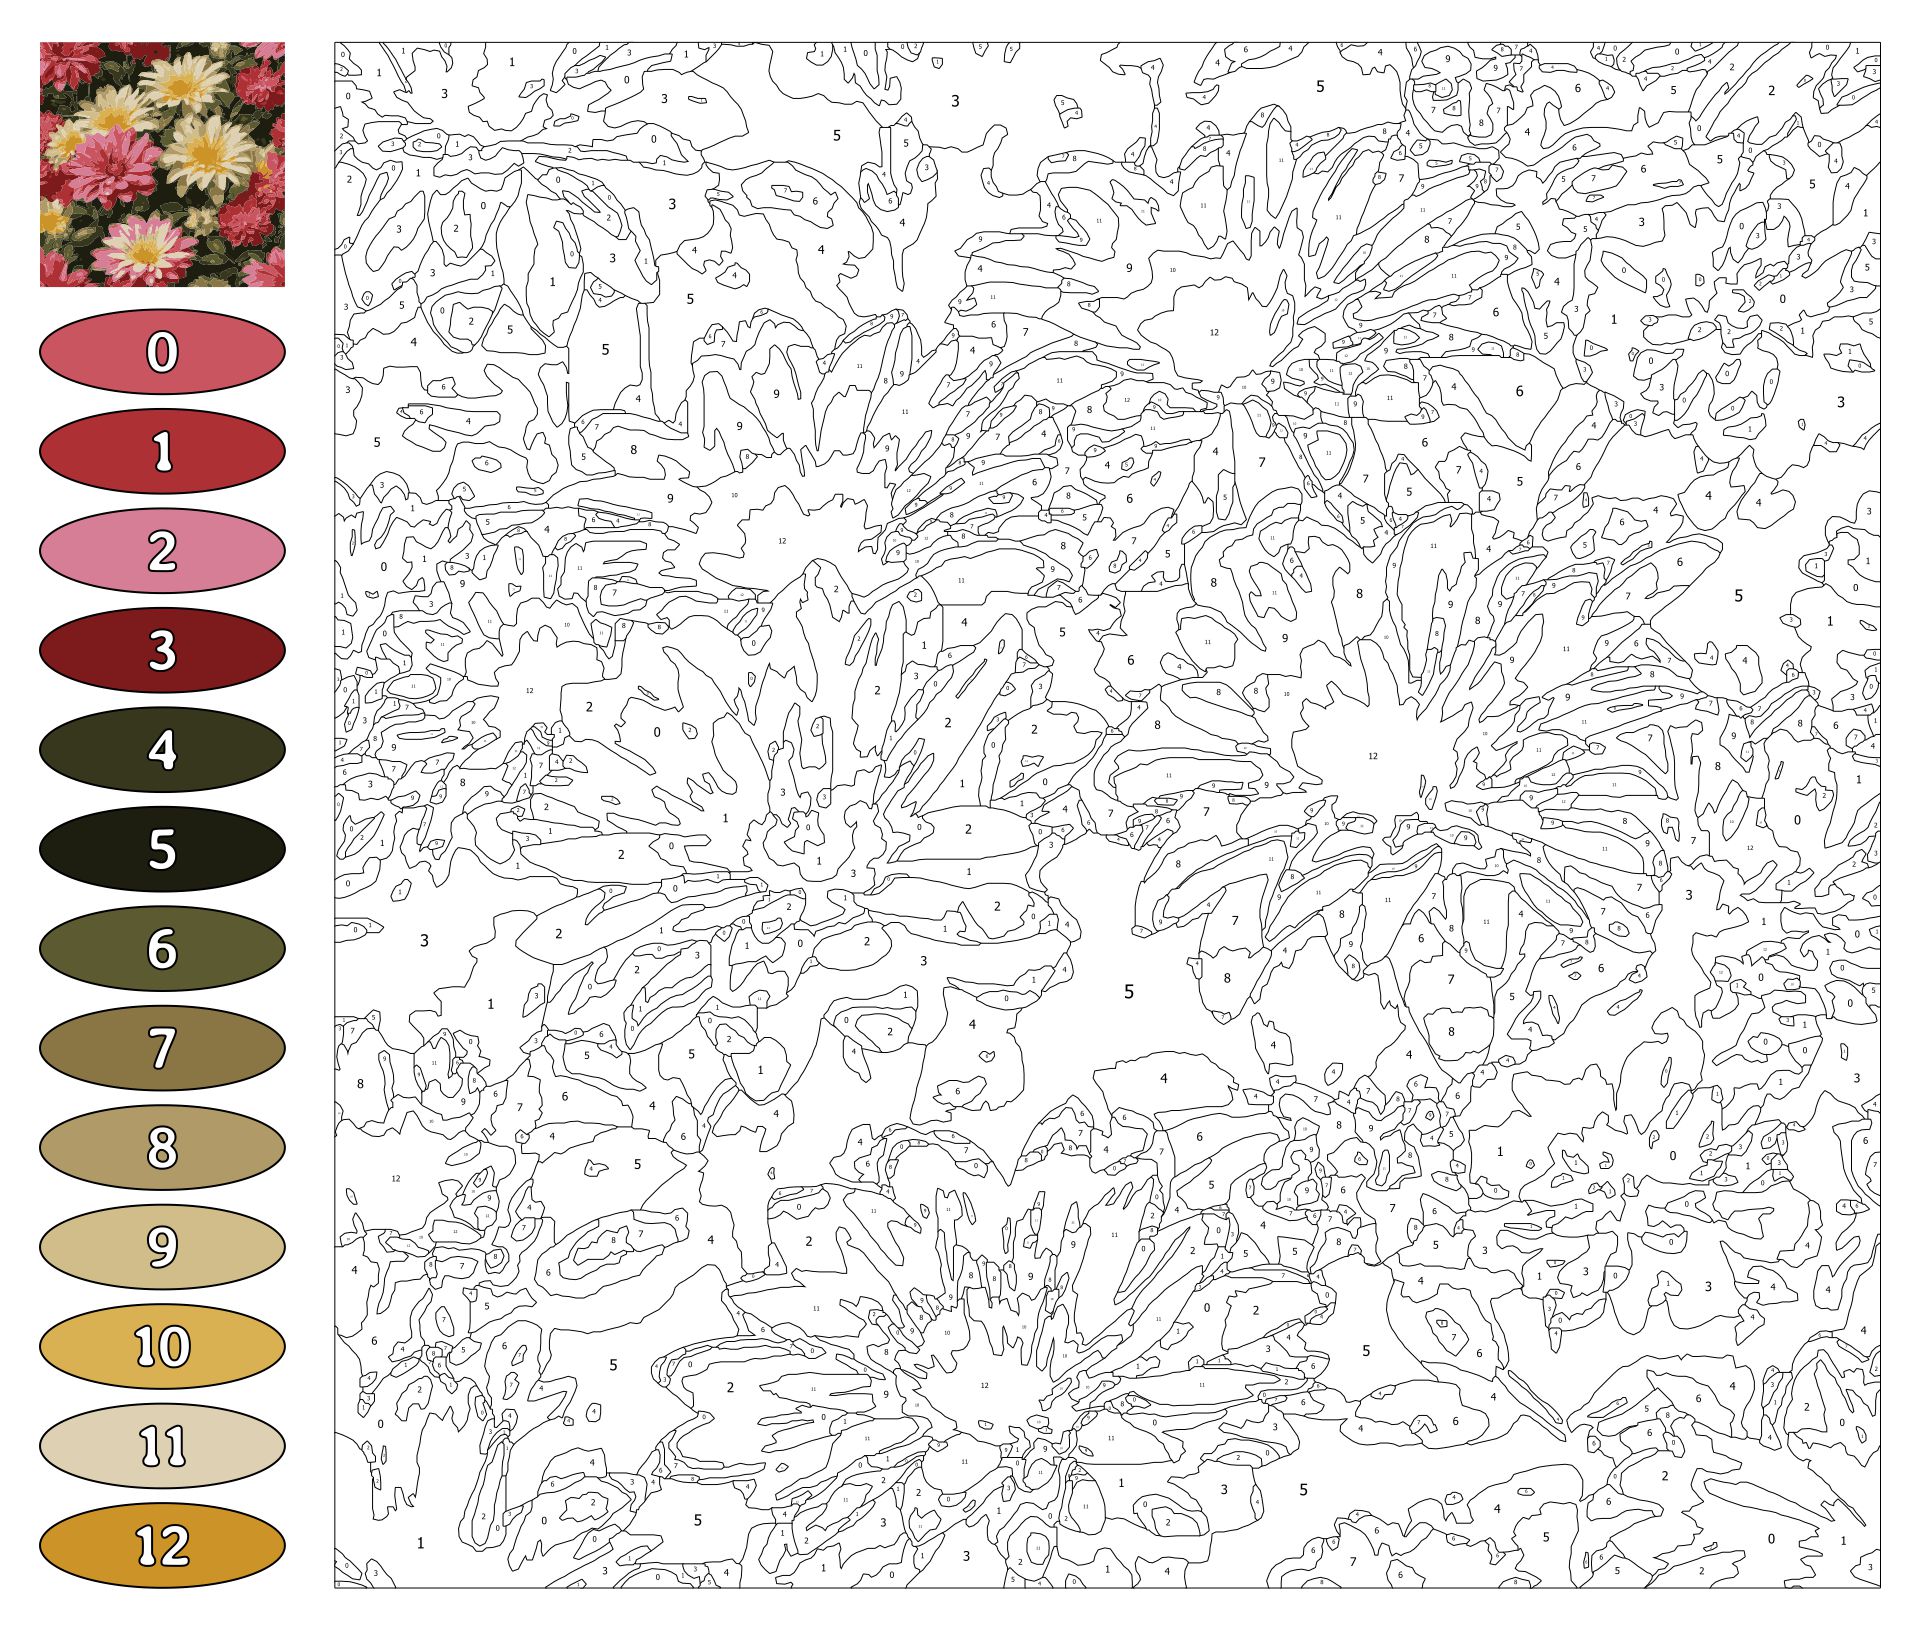 Free Paint by Numbers for Adults with Color Key! - OriginalMOM